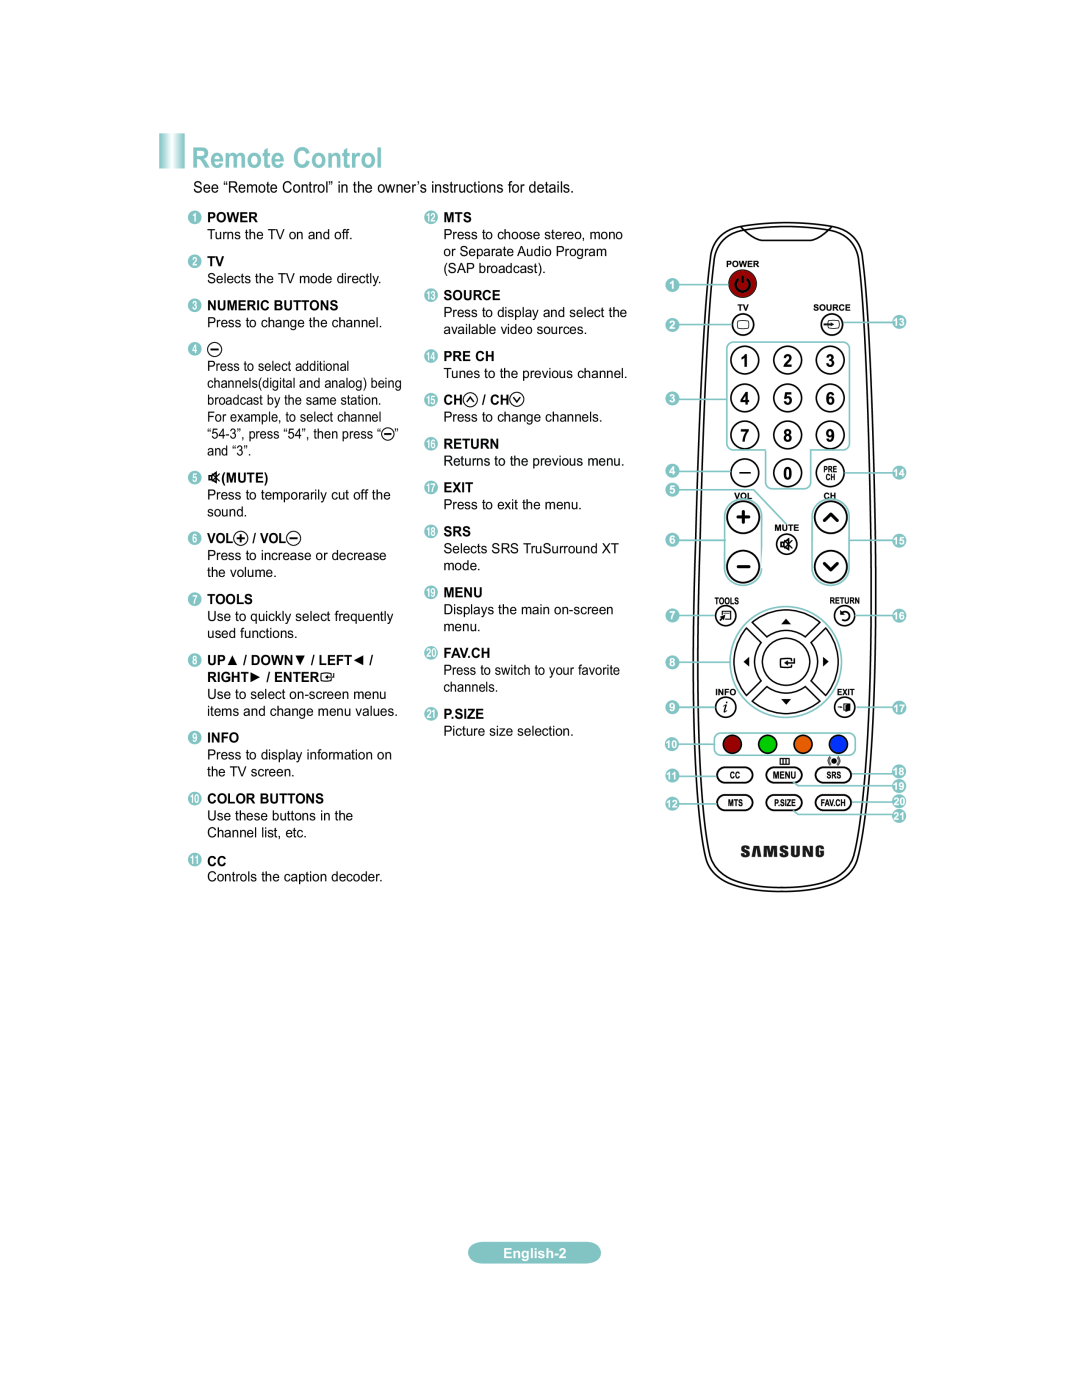 Samsung 451 See “Remote Control” in the owner’s instructions for details, Power, 2 TV, Mute, Vol / Vol, Tools, 8 UP 